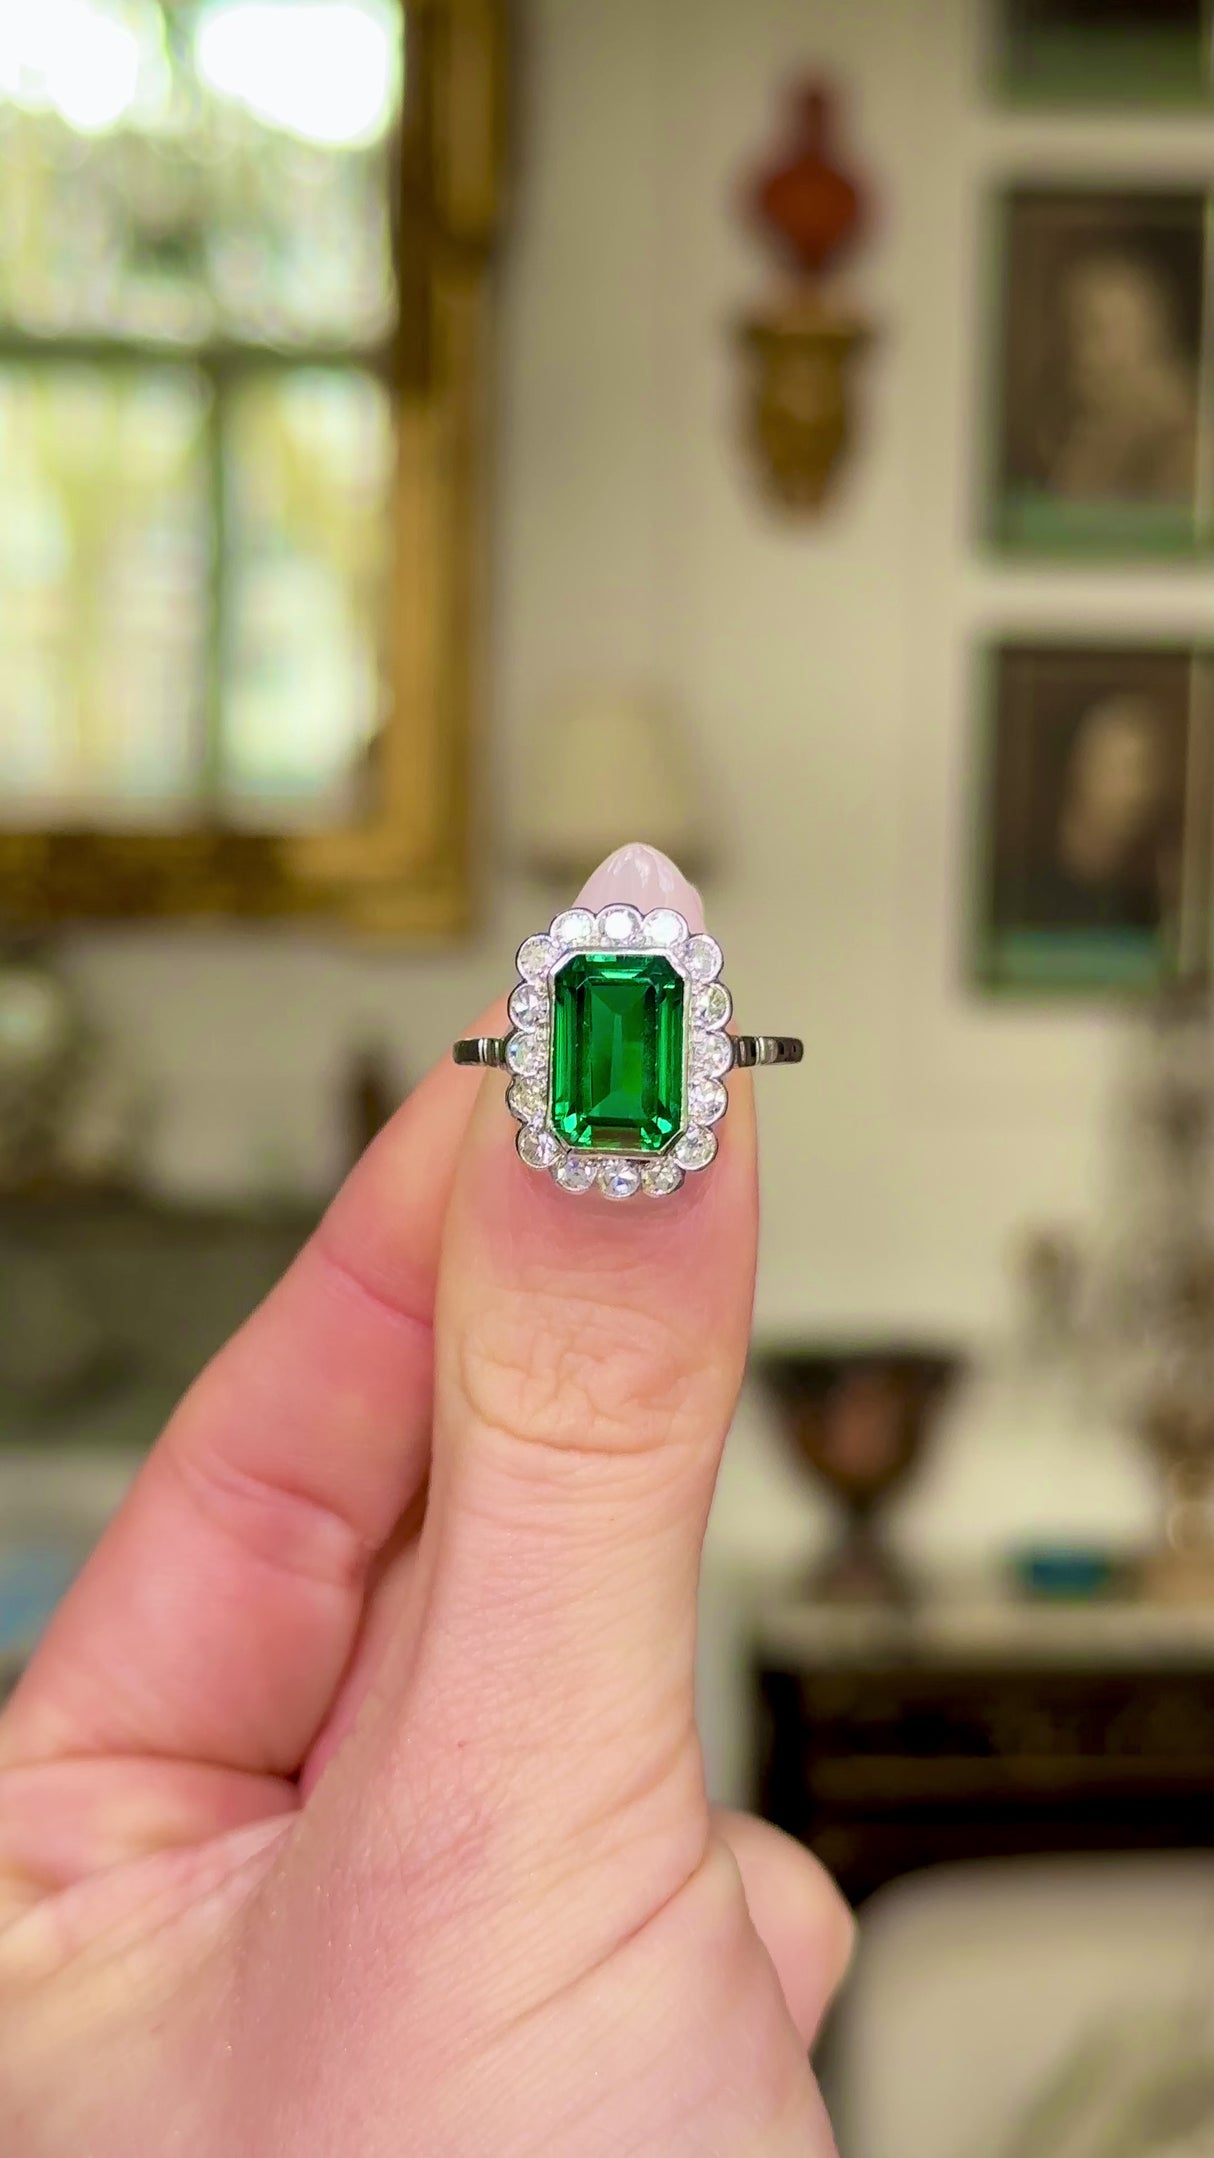 Antique green paste and diamond cluster ring, moved around to give perspective.